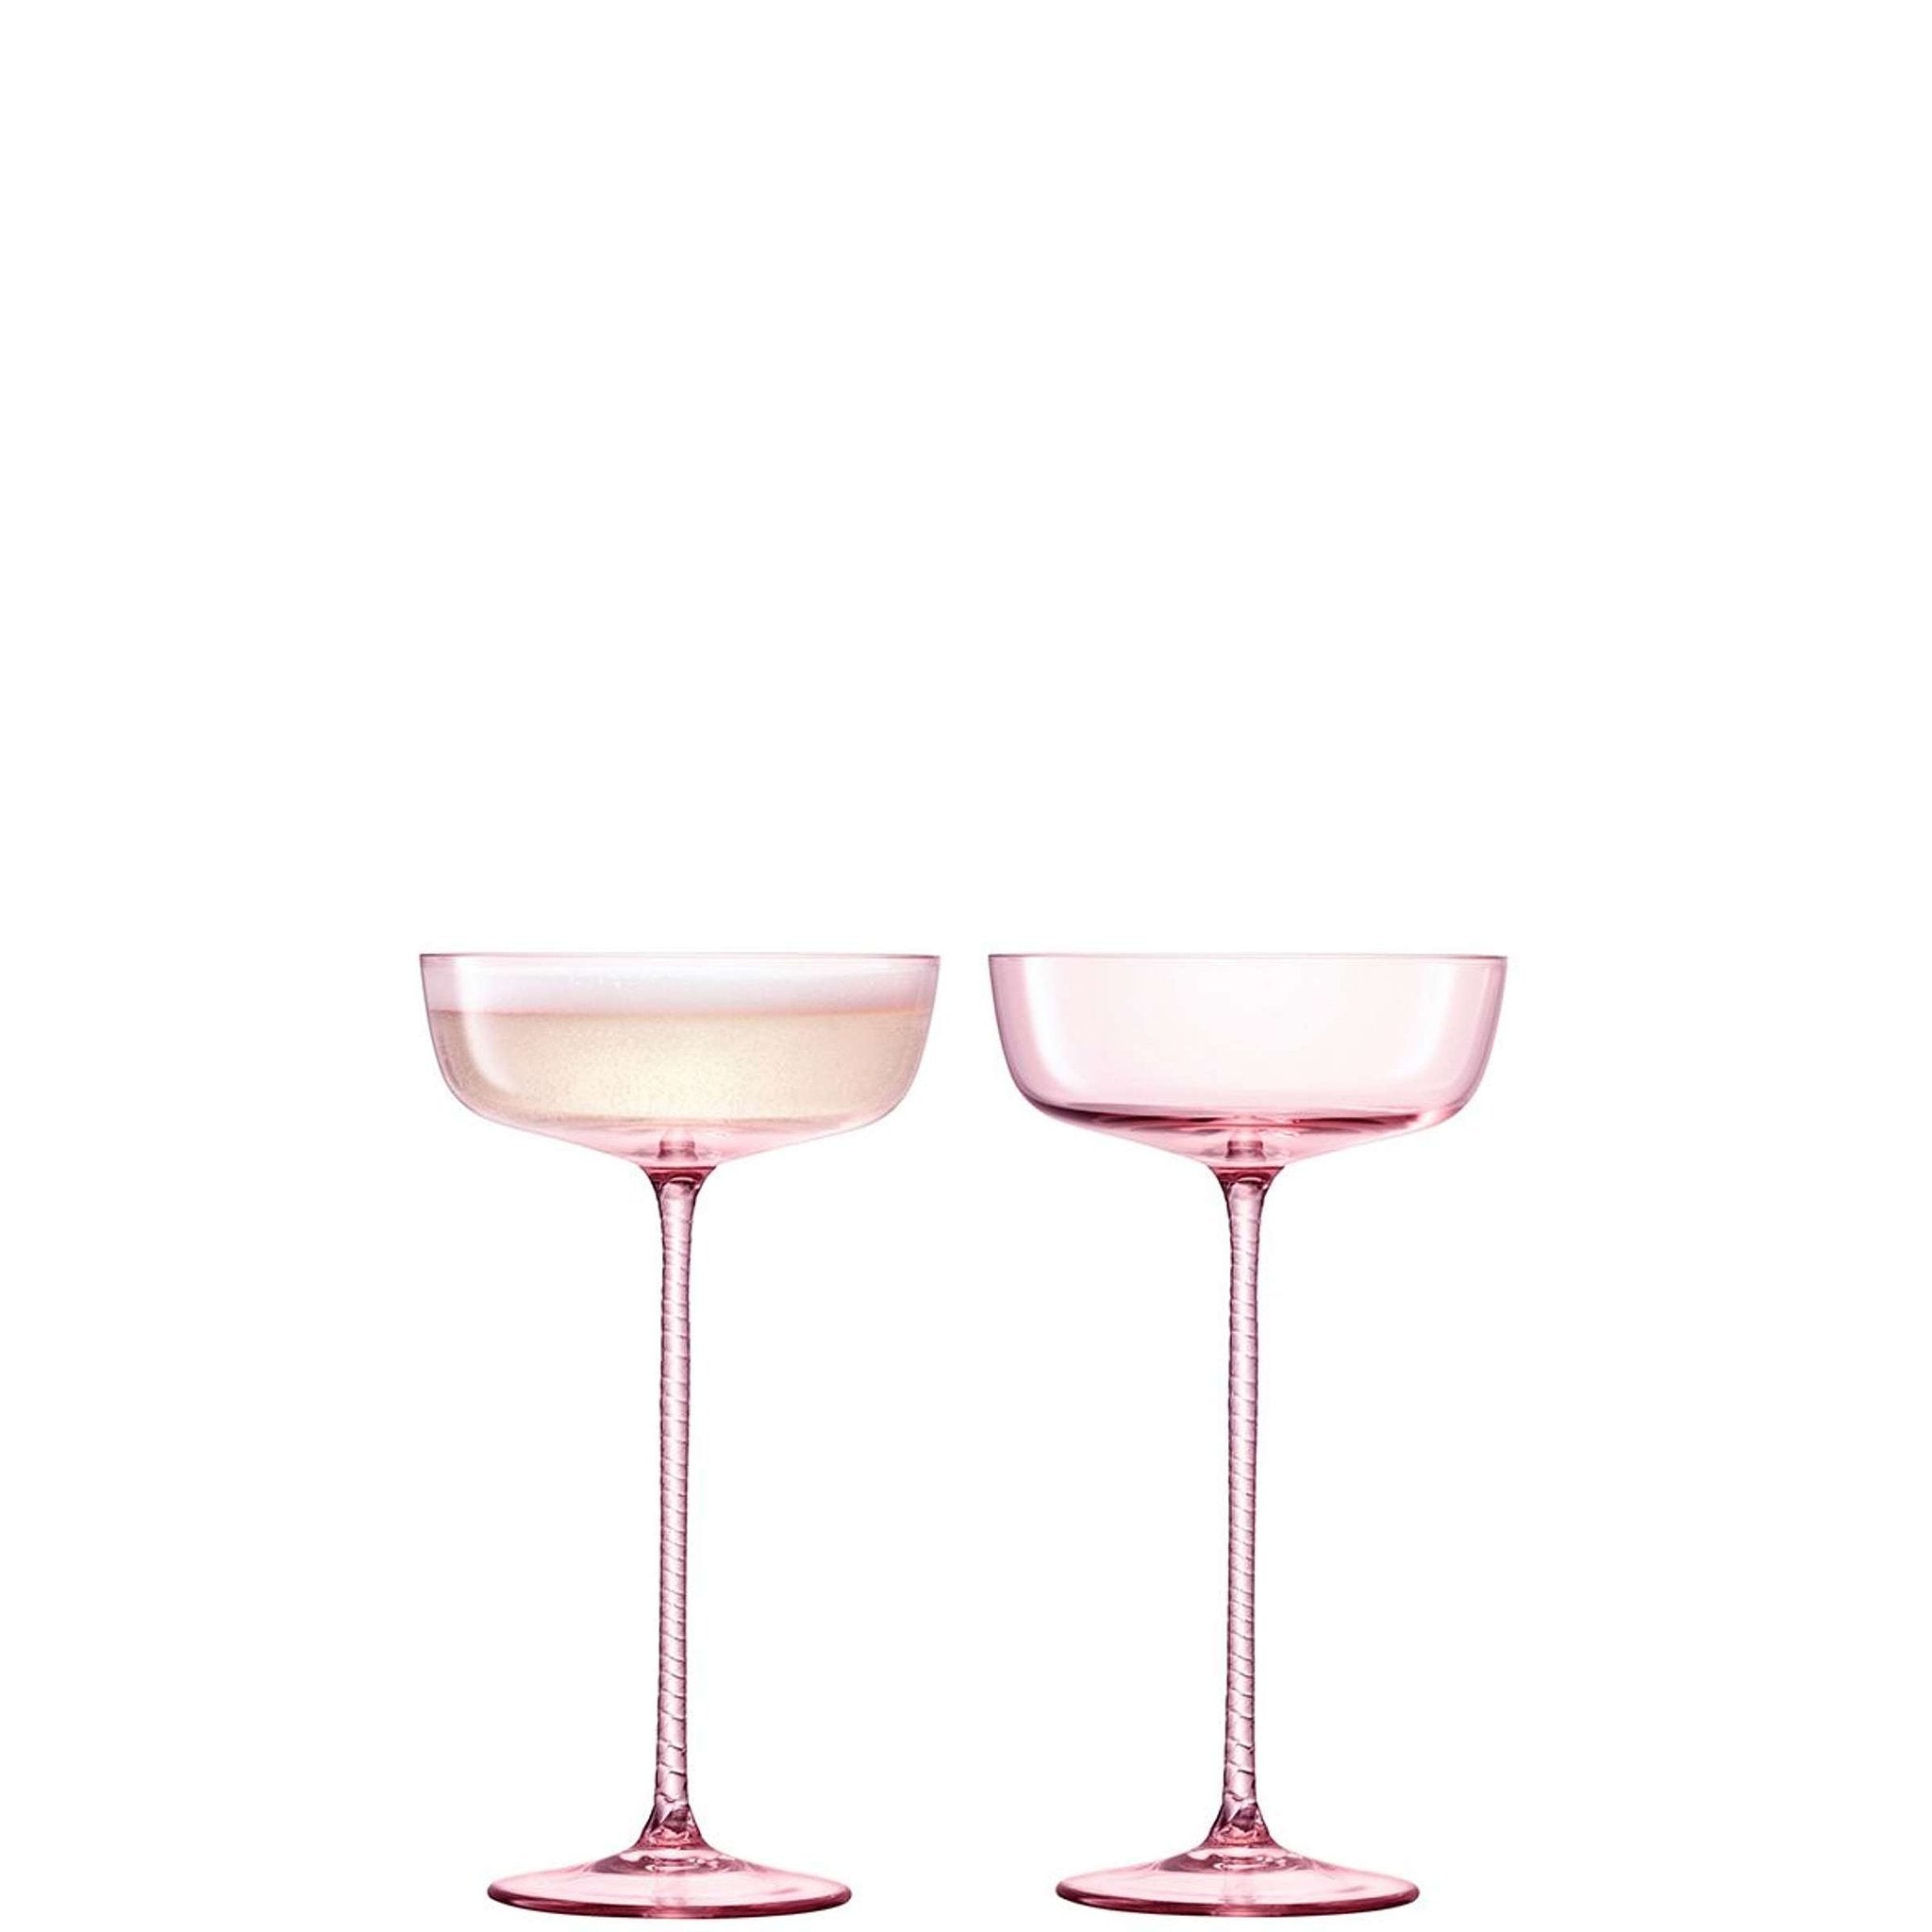 L.S.A. Champagne Theatre Champagne Saucer 190 ml Set of 2 Pieces